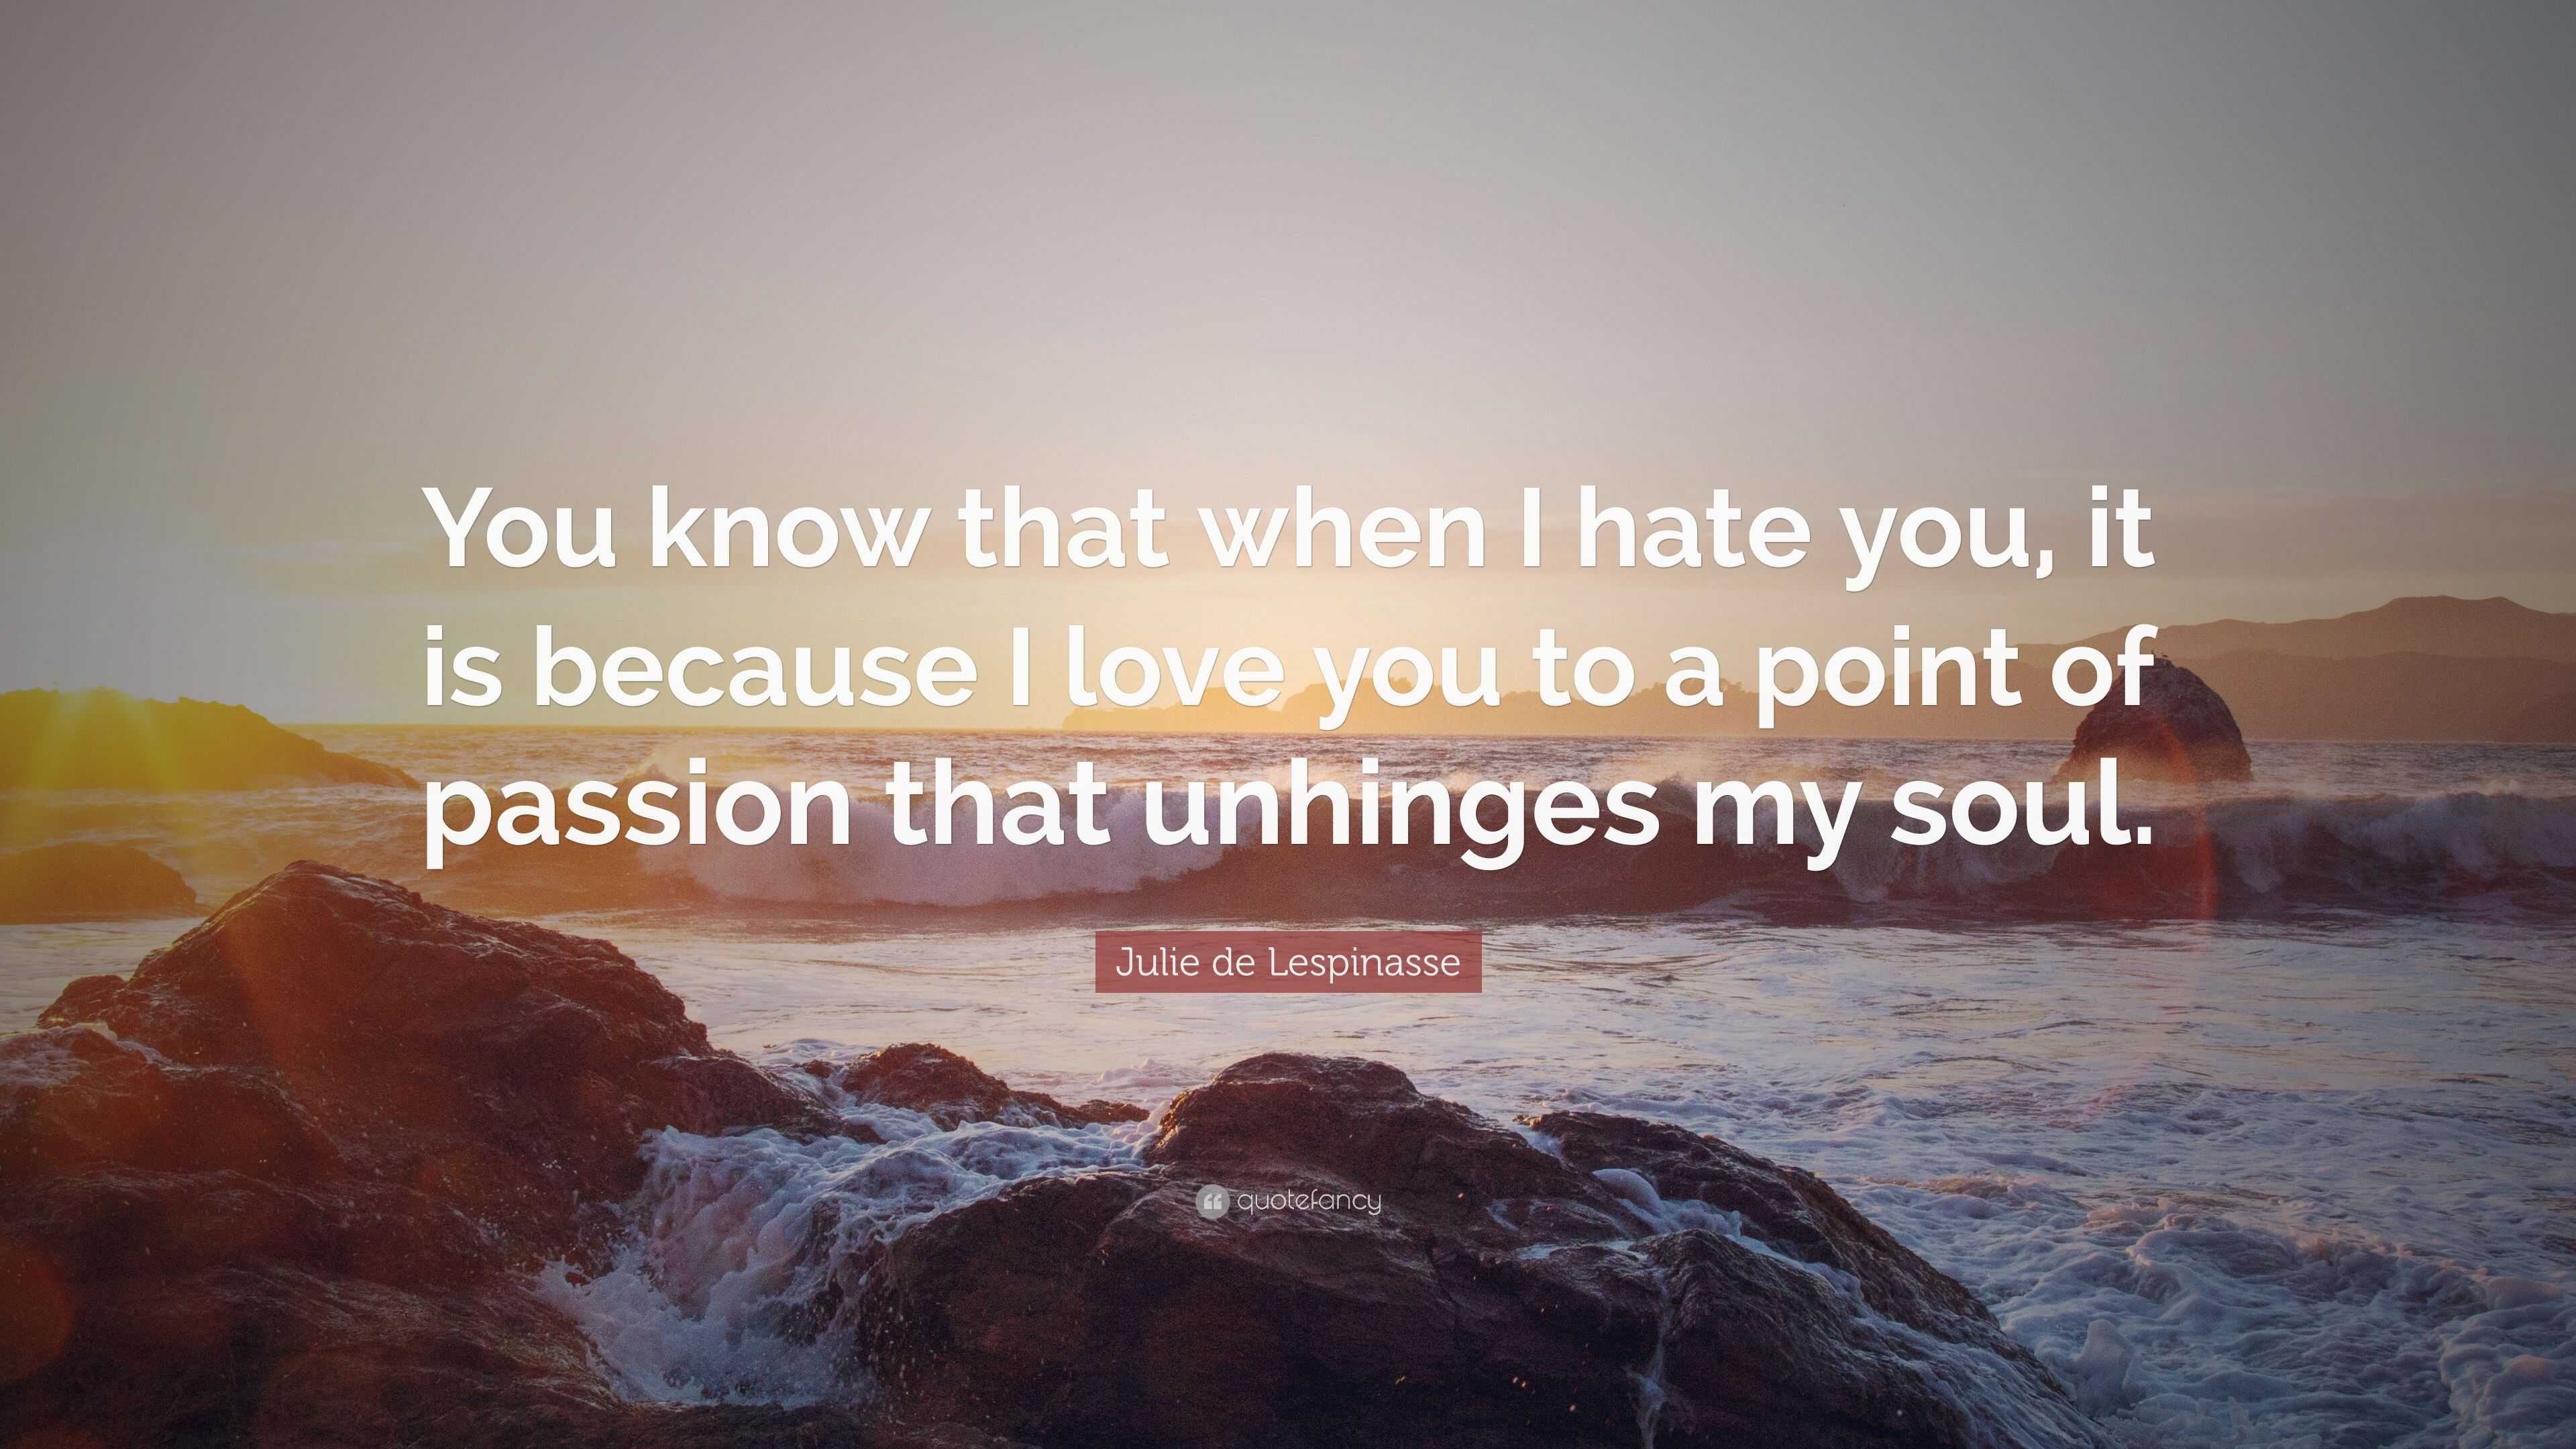 Julie De Lespinasse Quote You Know That When I Hate You It Is Because I Love You To A Point Of Passion That Unhinges My Soul 7 Wallpapers Quotefancy